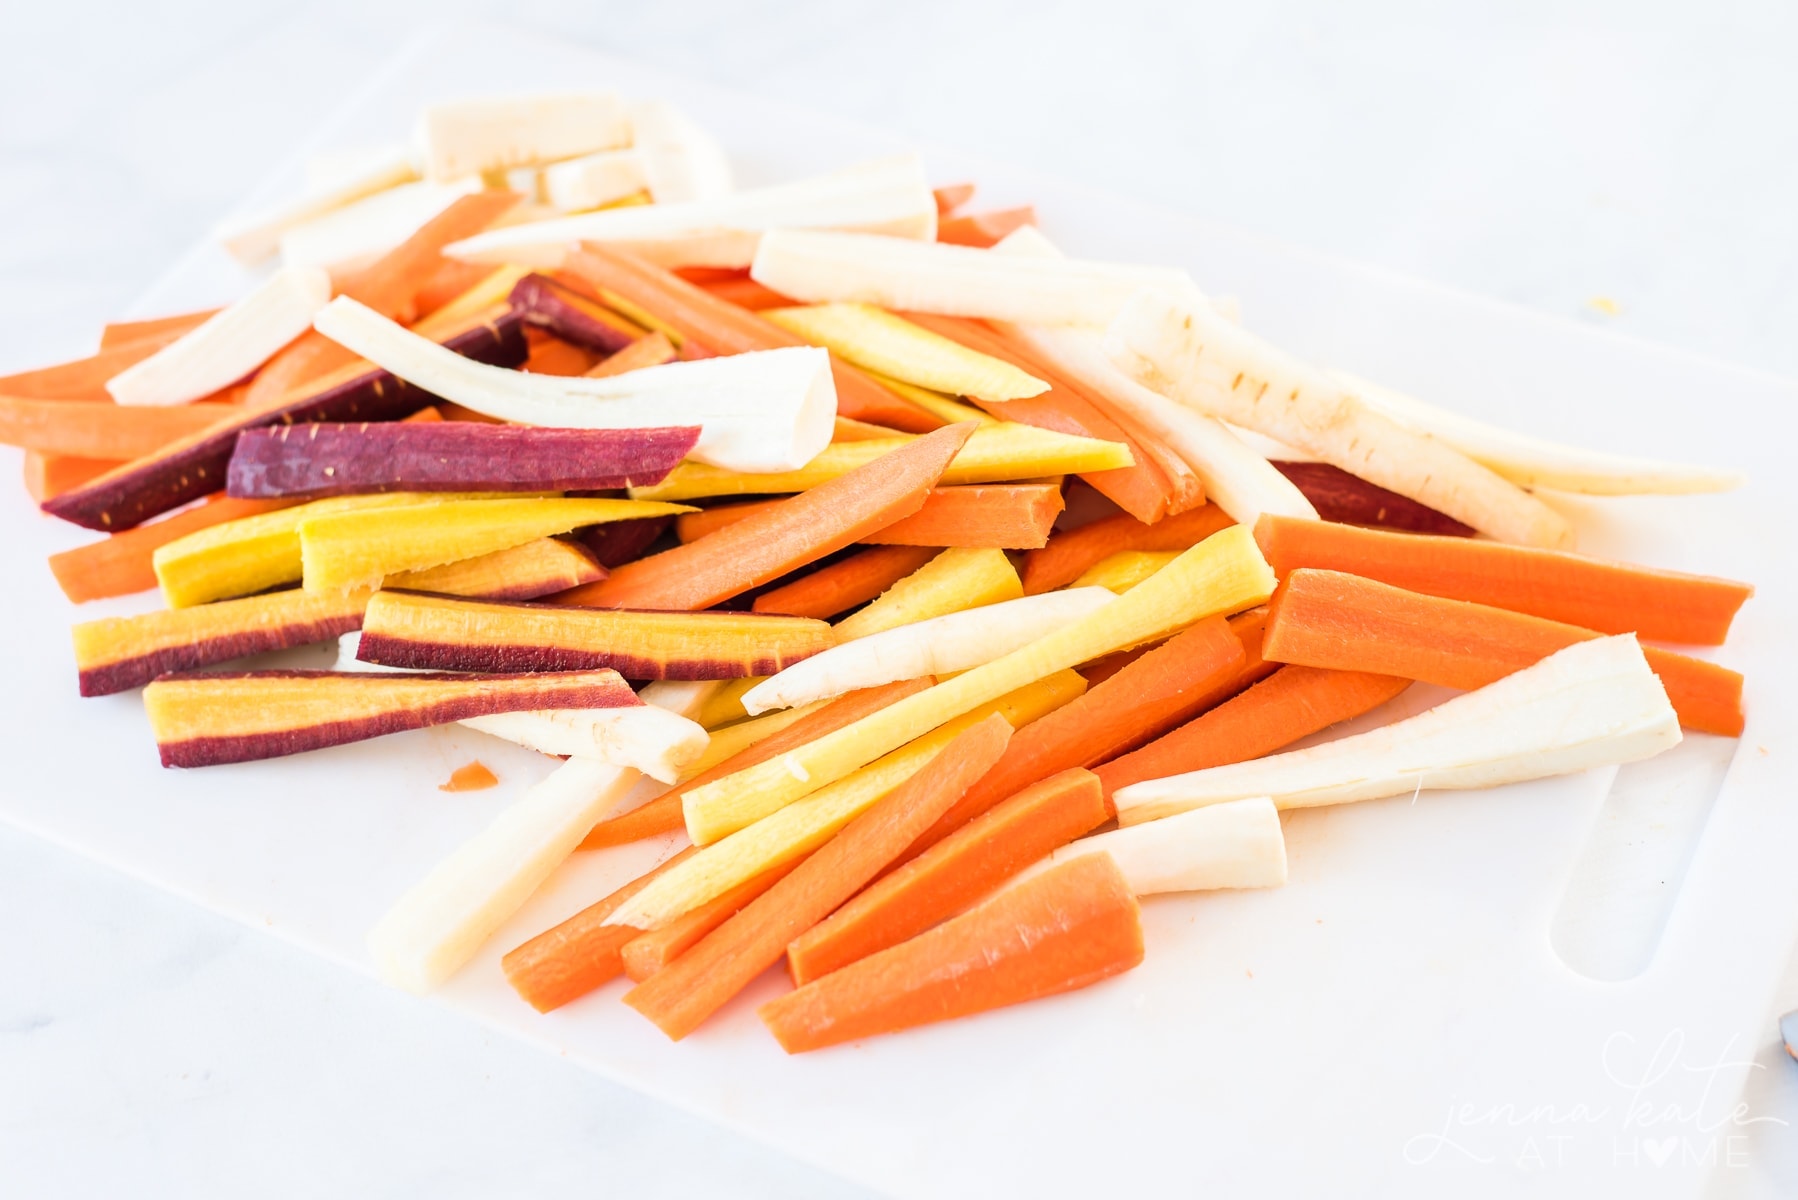 These colorful root vegetables are fresh and ready to be roasted to perfection for this one-pan Thanksgiving dinner